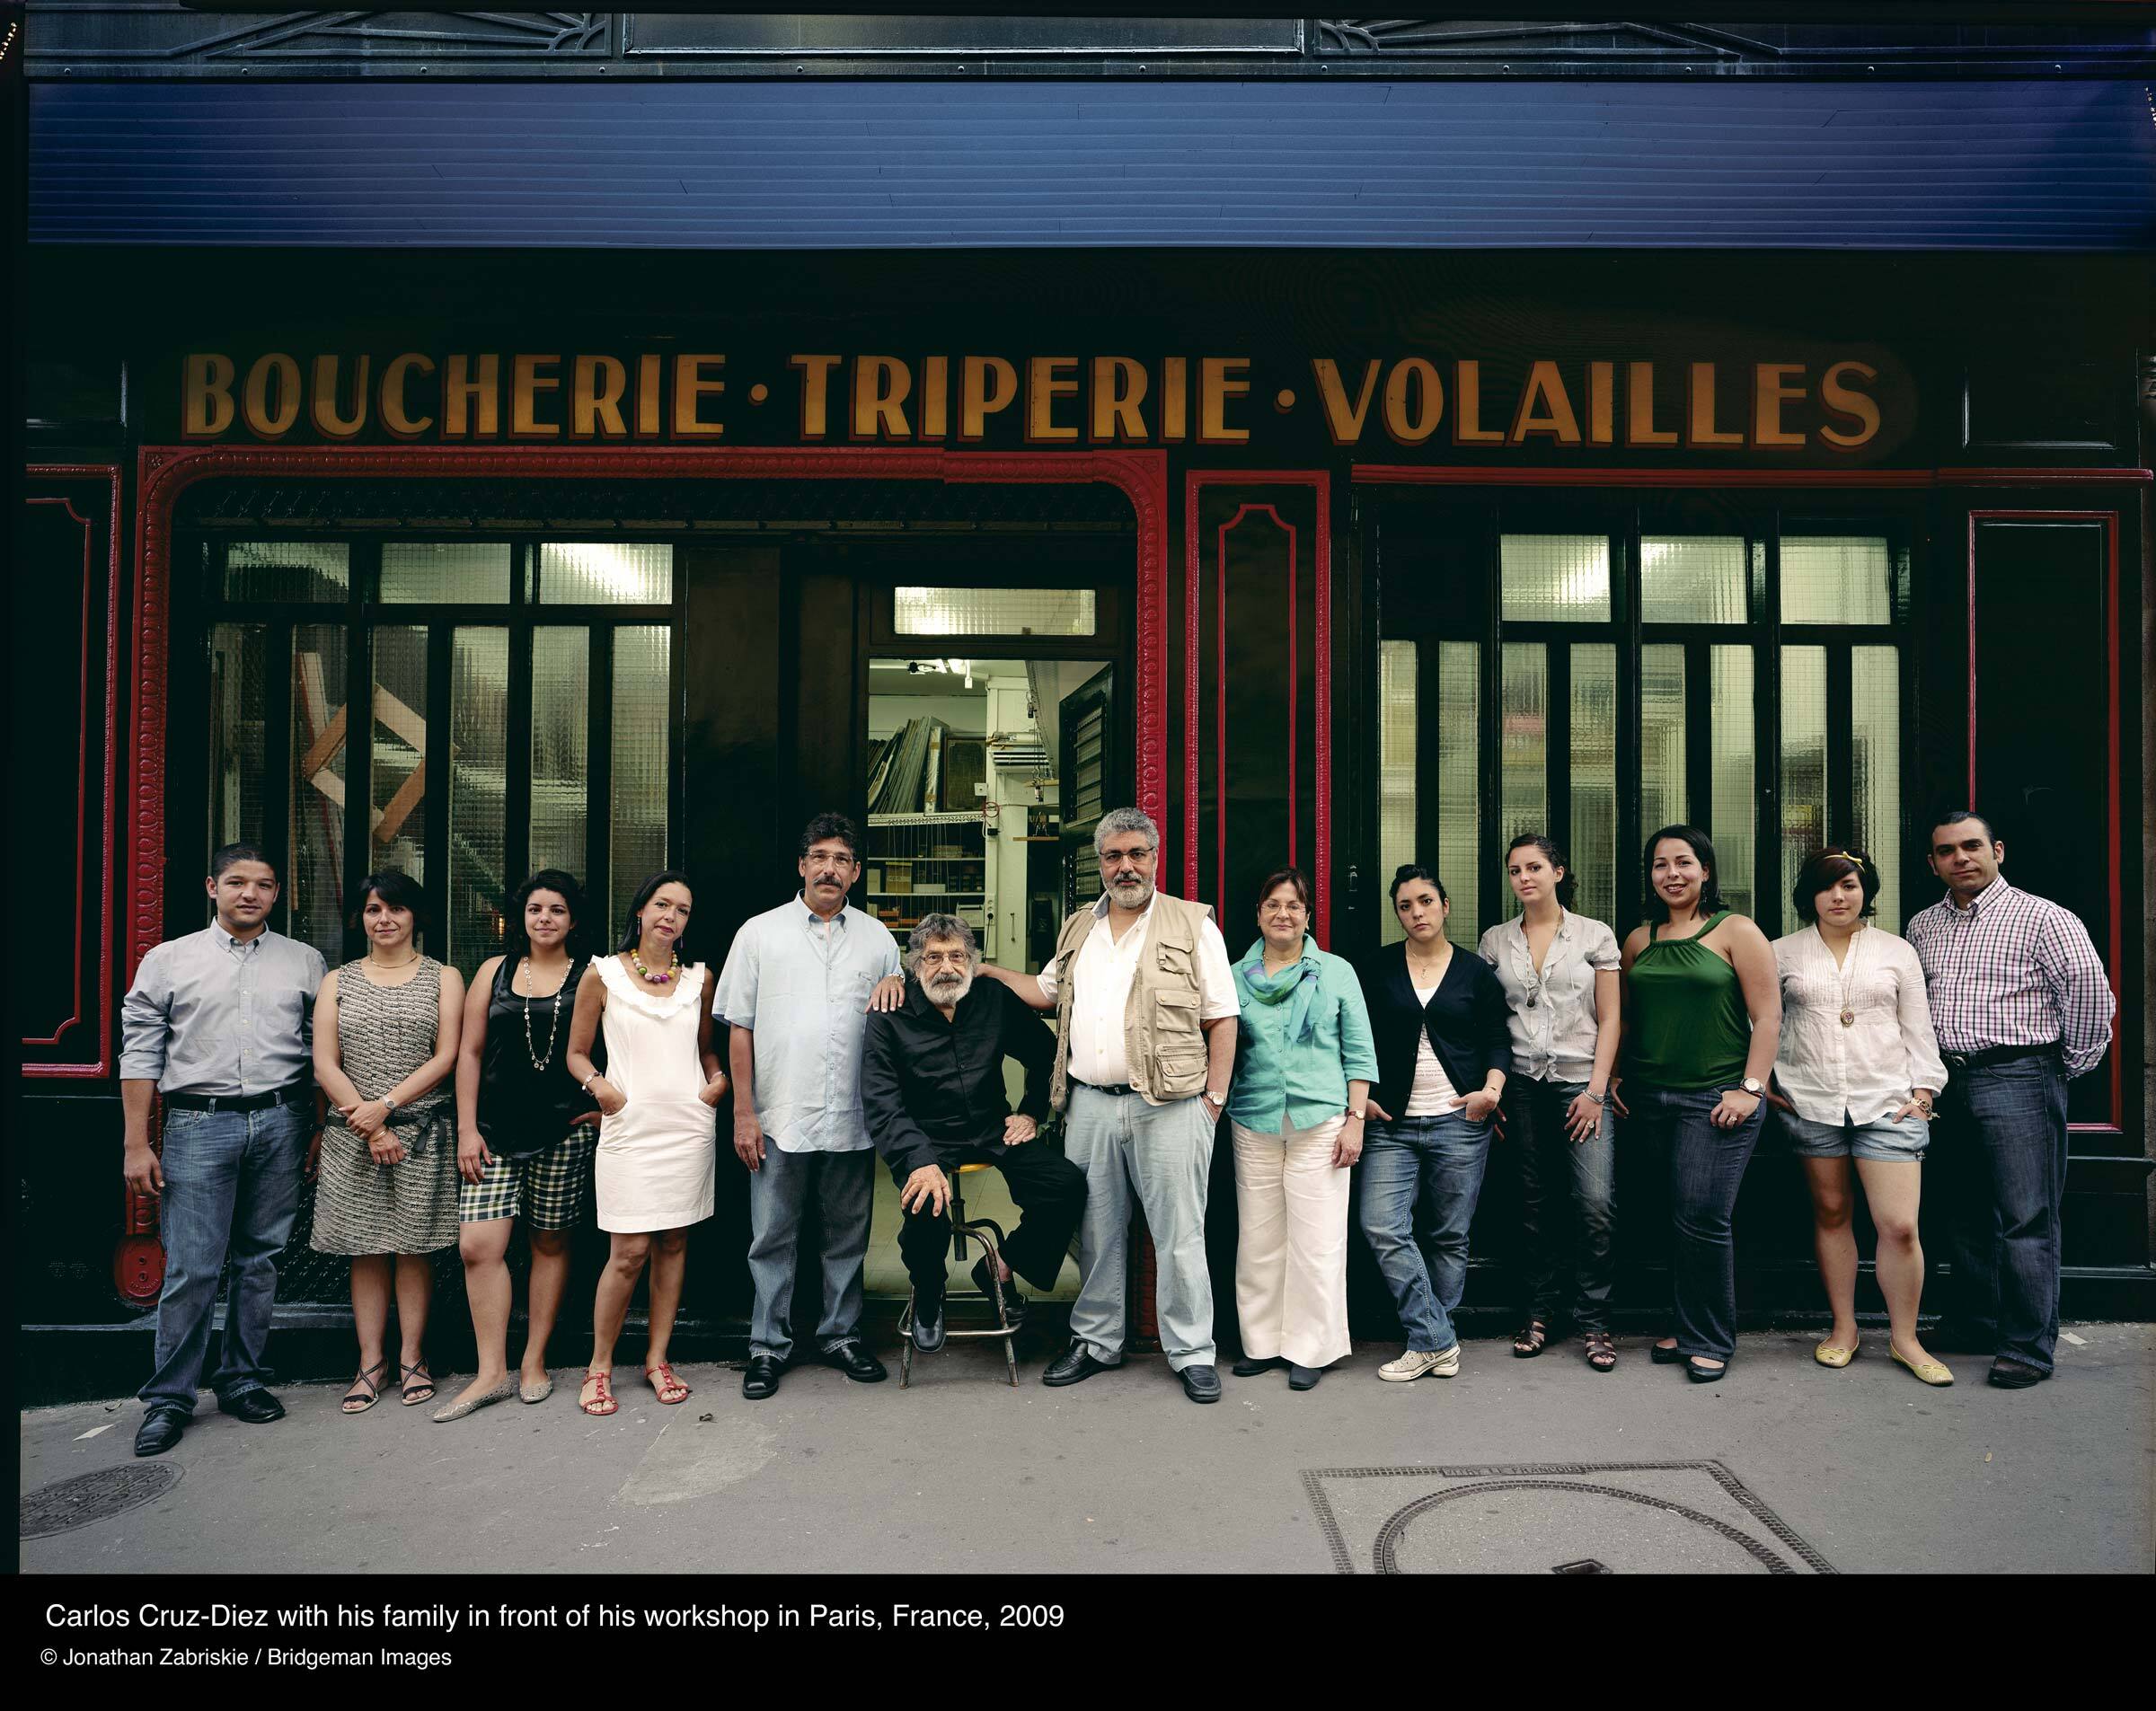 Carlos Cruz-Diez with his family in front of his workshop in Paris, France 2009